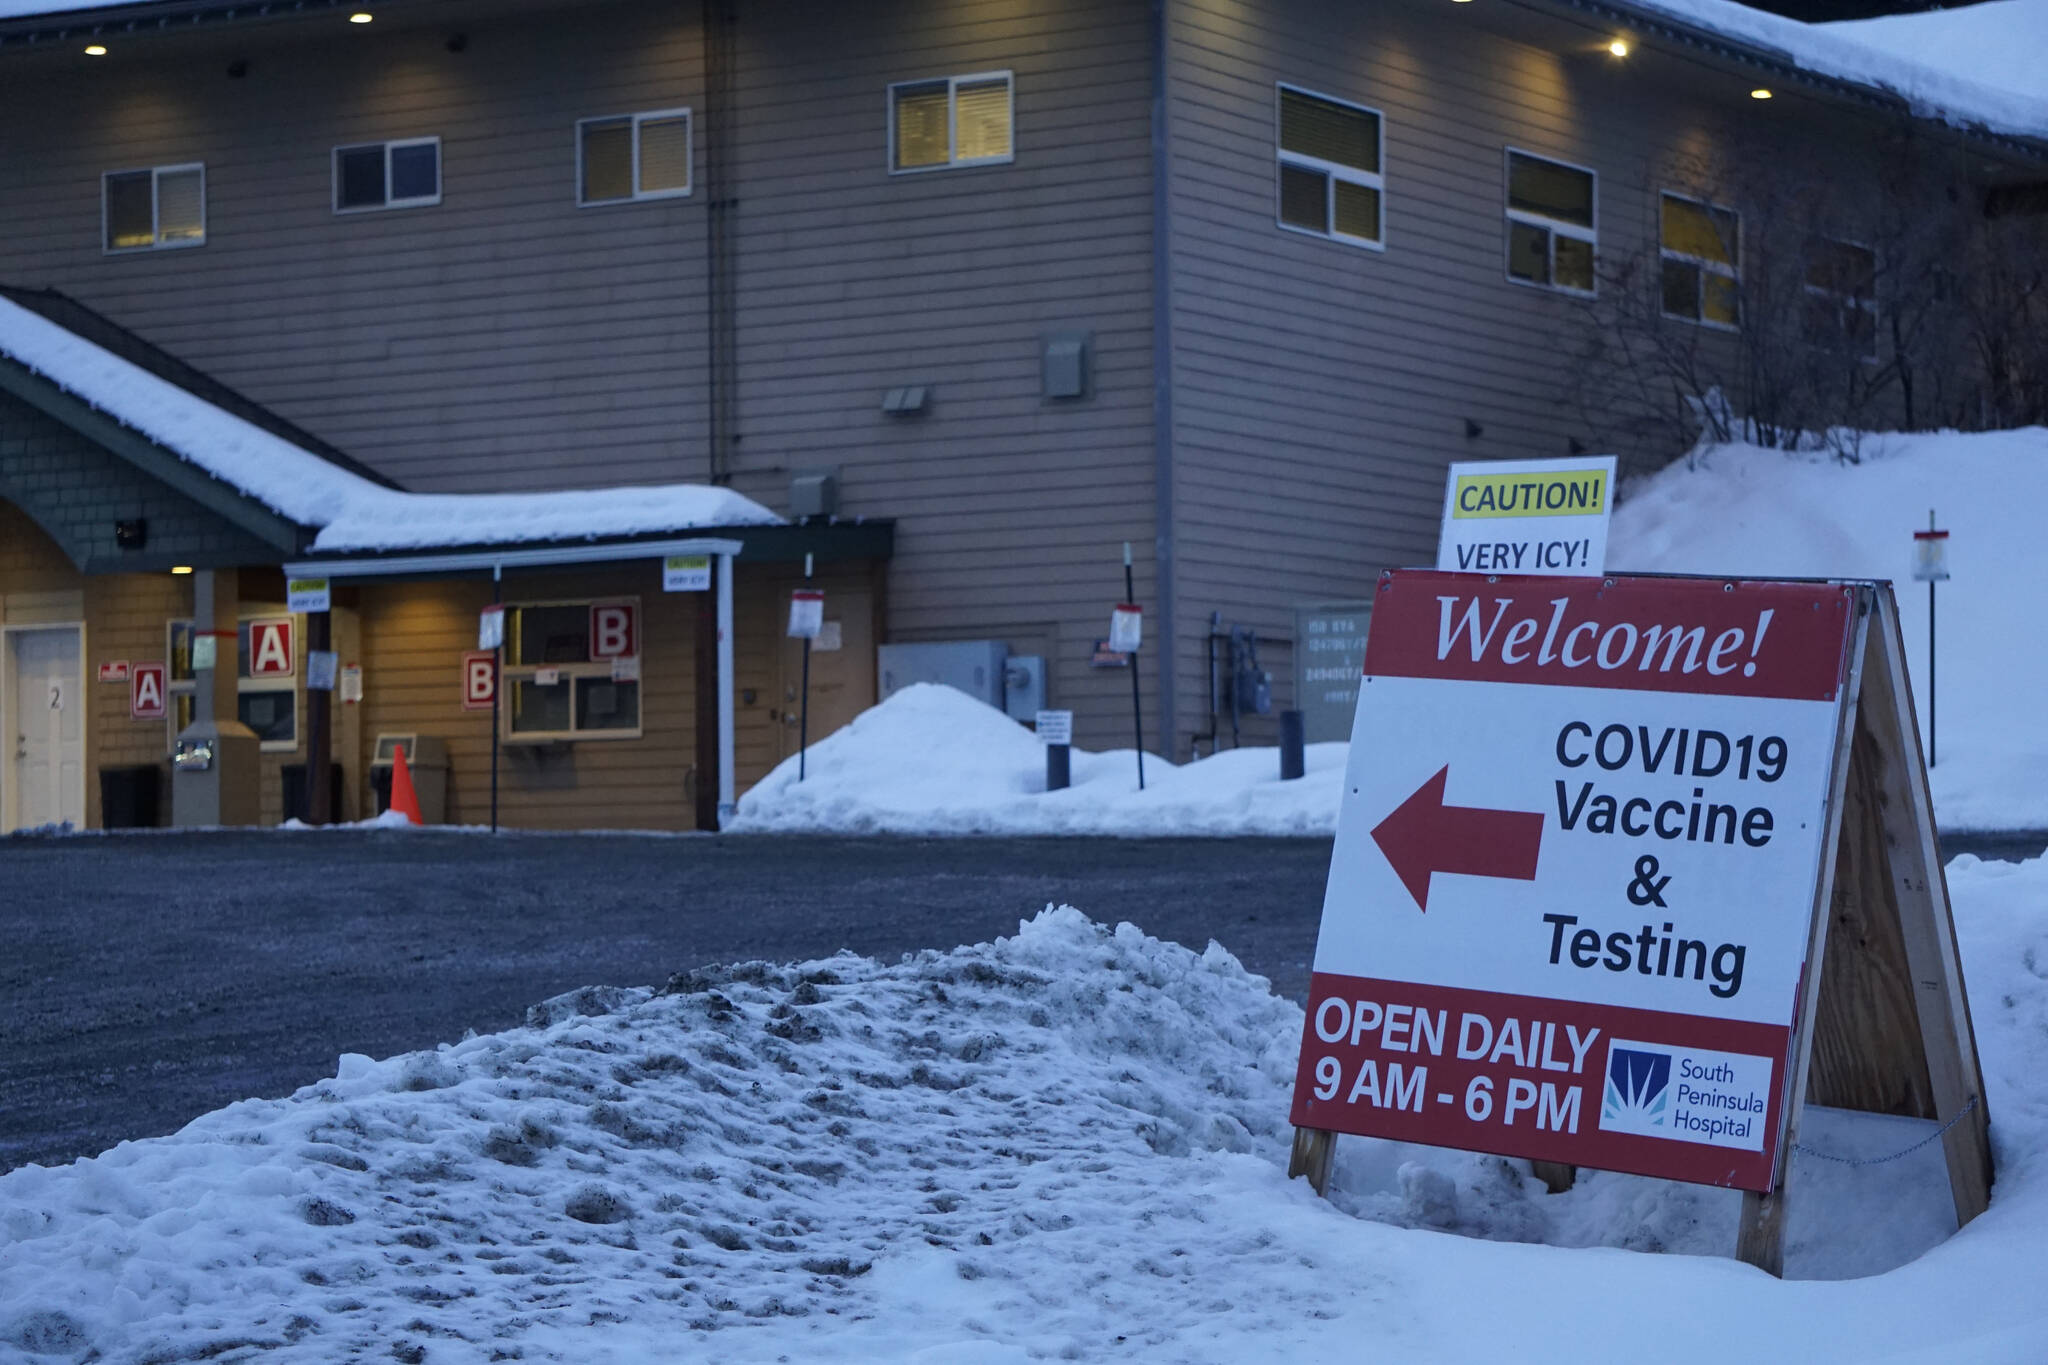 A sign warns of icy conditions in the parking lot of the Bartlett Street COVID-19 vaccine and testing clinic on Thursday, Jan. 13, 2022, in Homer, Alaska. (Photo by Michael Armstrong/Homer News)